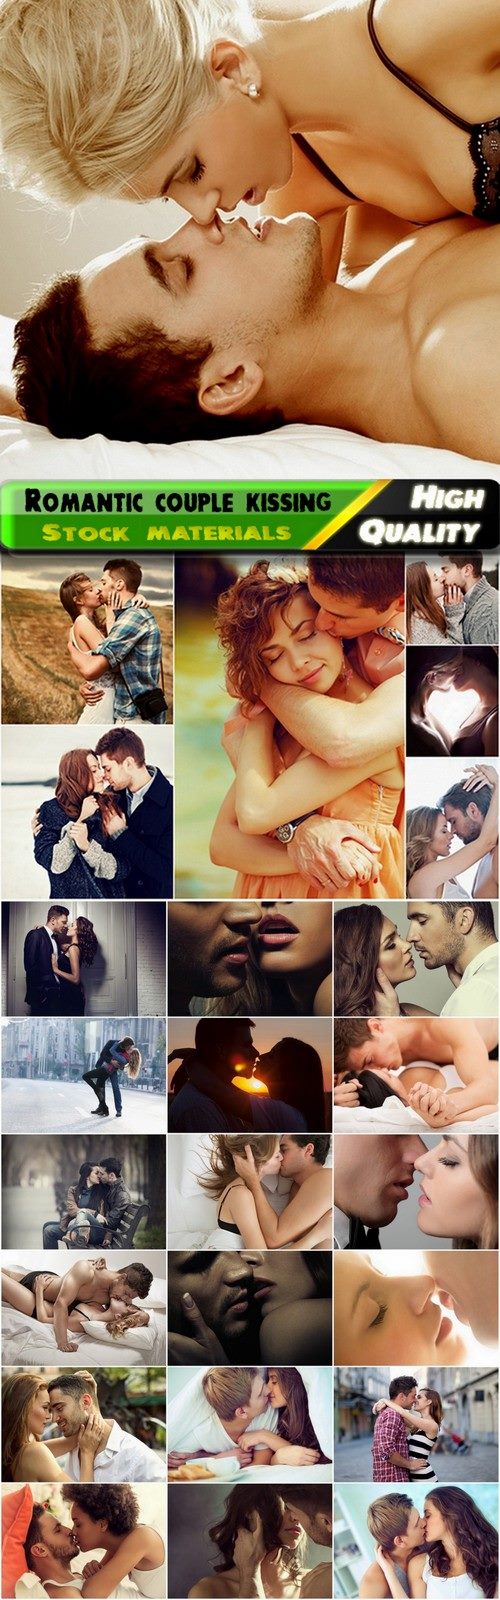 Romantic couple kissing and love each other - 25 HQ Jpg